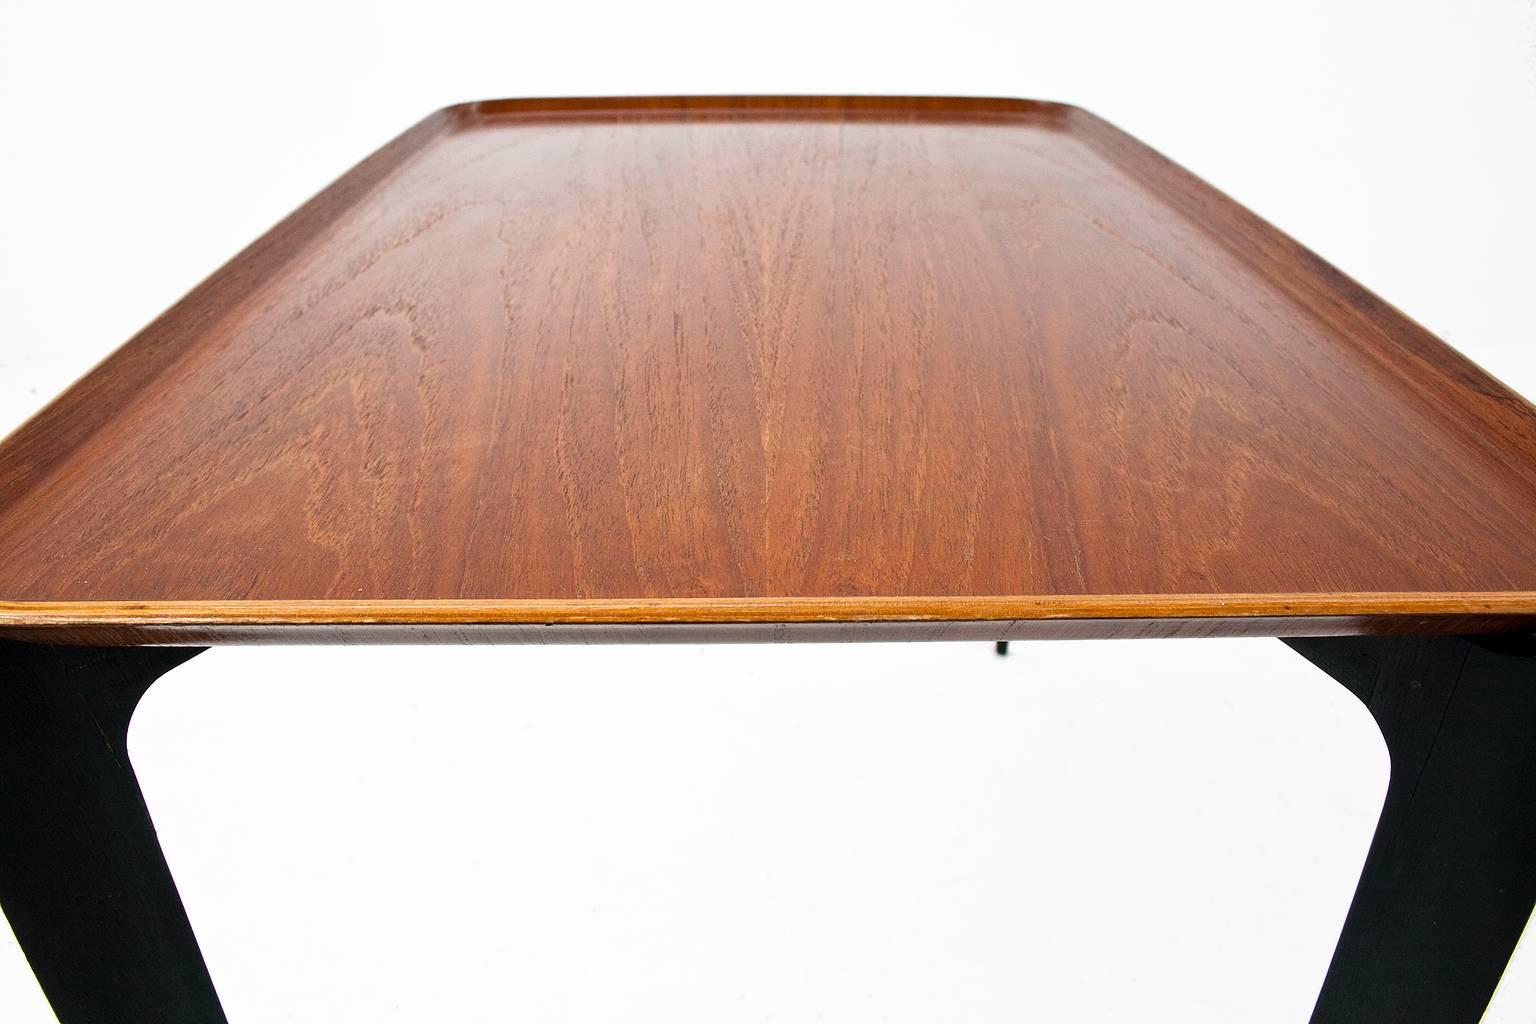 Mid-20th Century Teak Side Table by Willumsen and Engholm for Fritz Hansen, 1950s, Danish Design